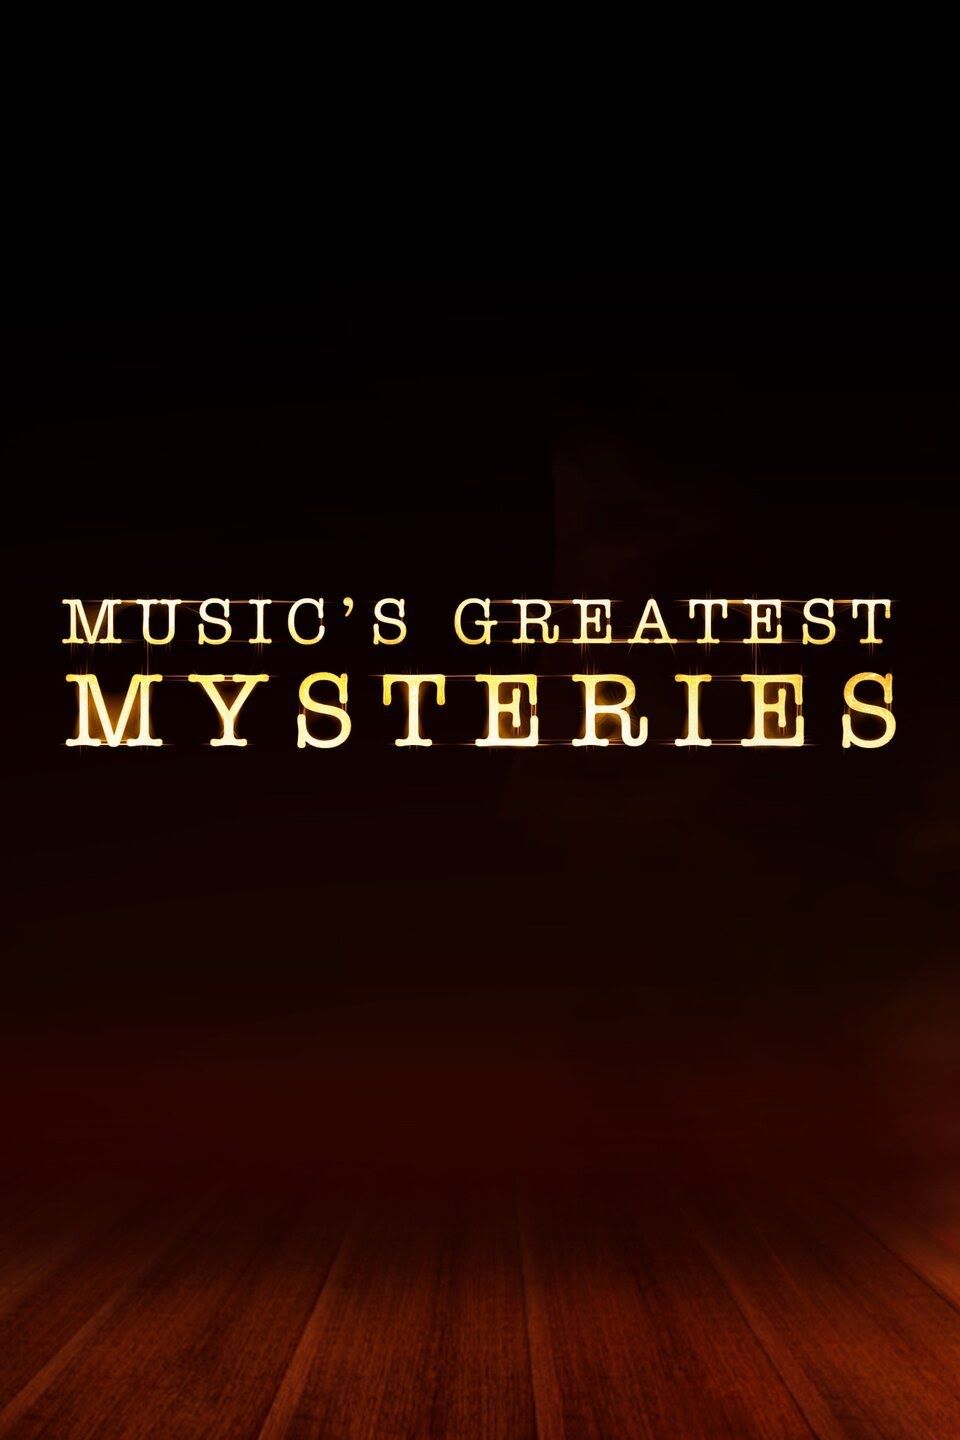 The Greatest Mysteries. Субтитры Music. Great Mysteries of the past компания. Great mystery